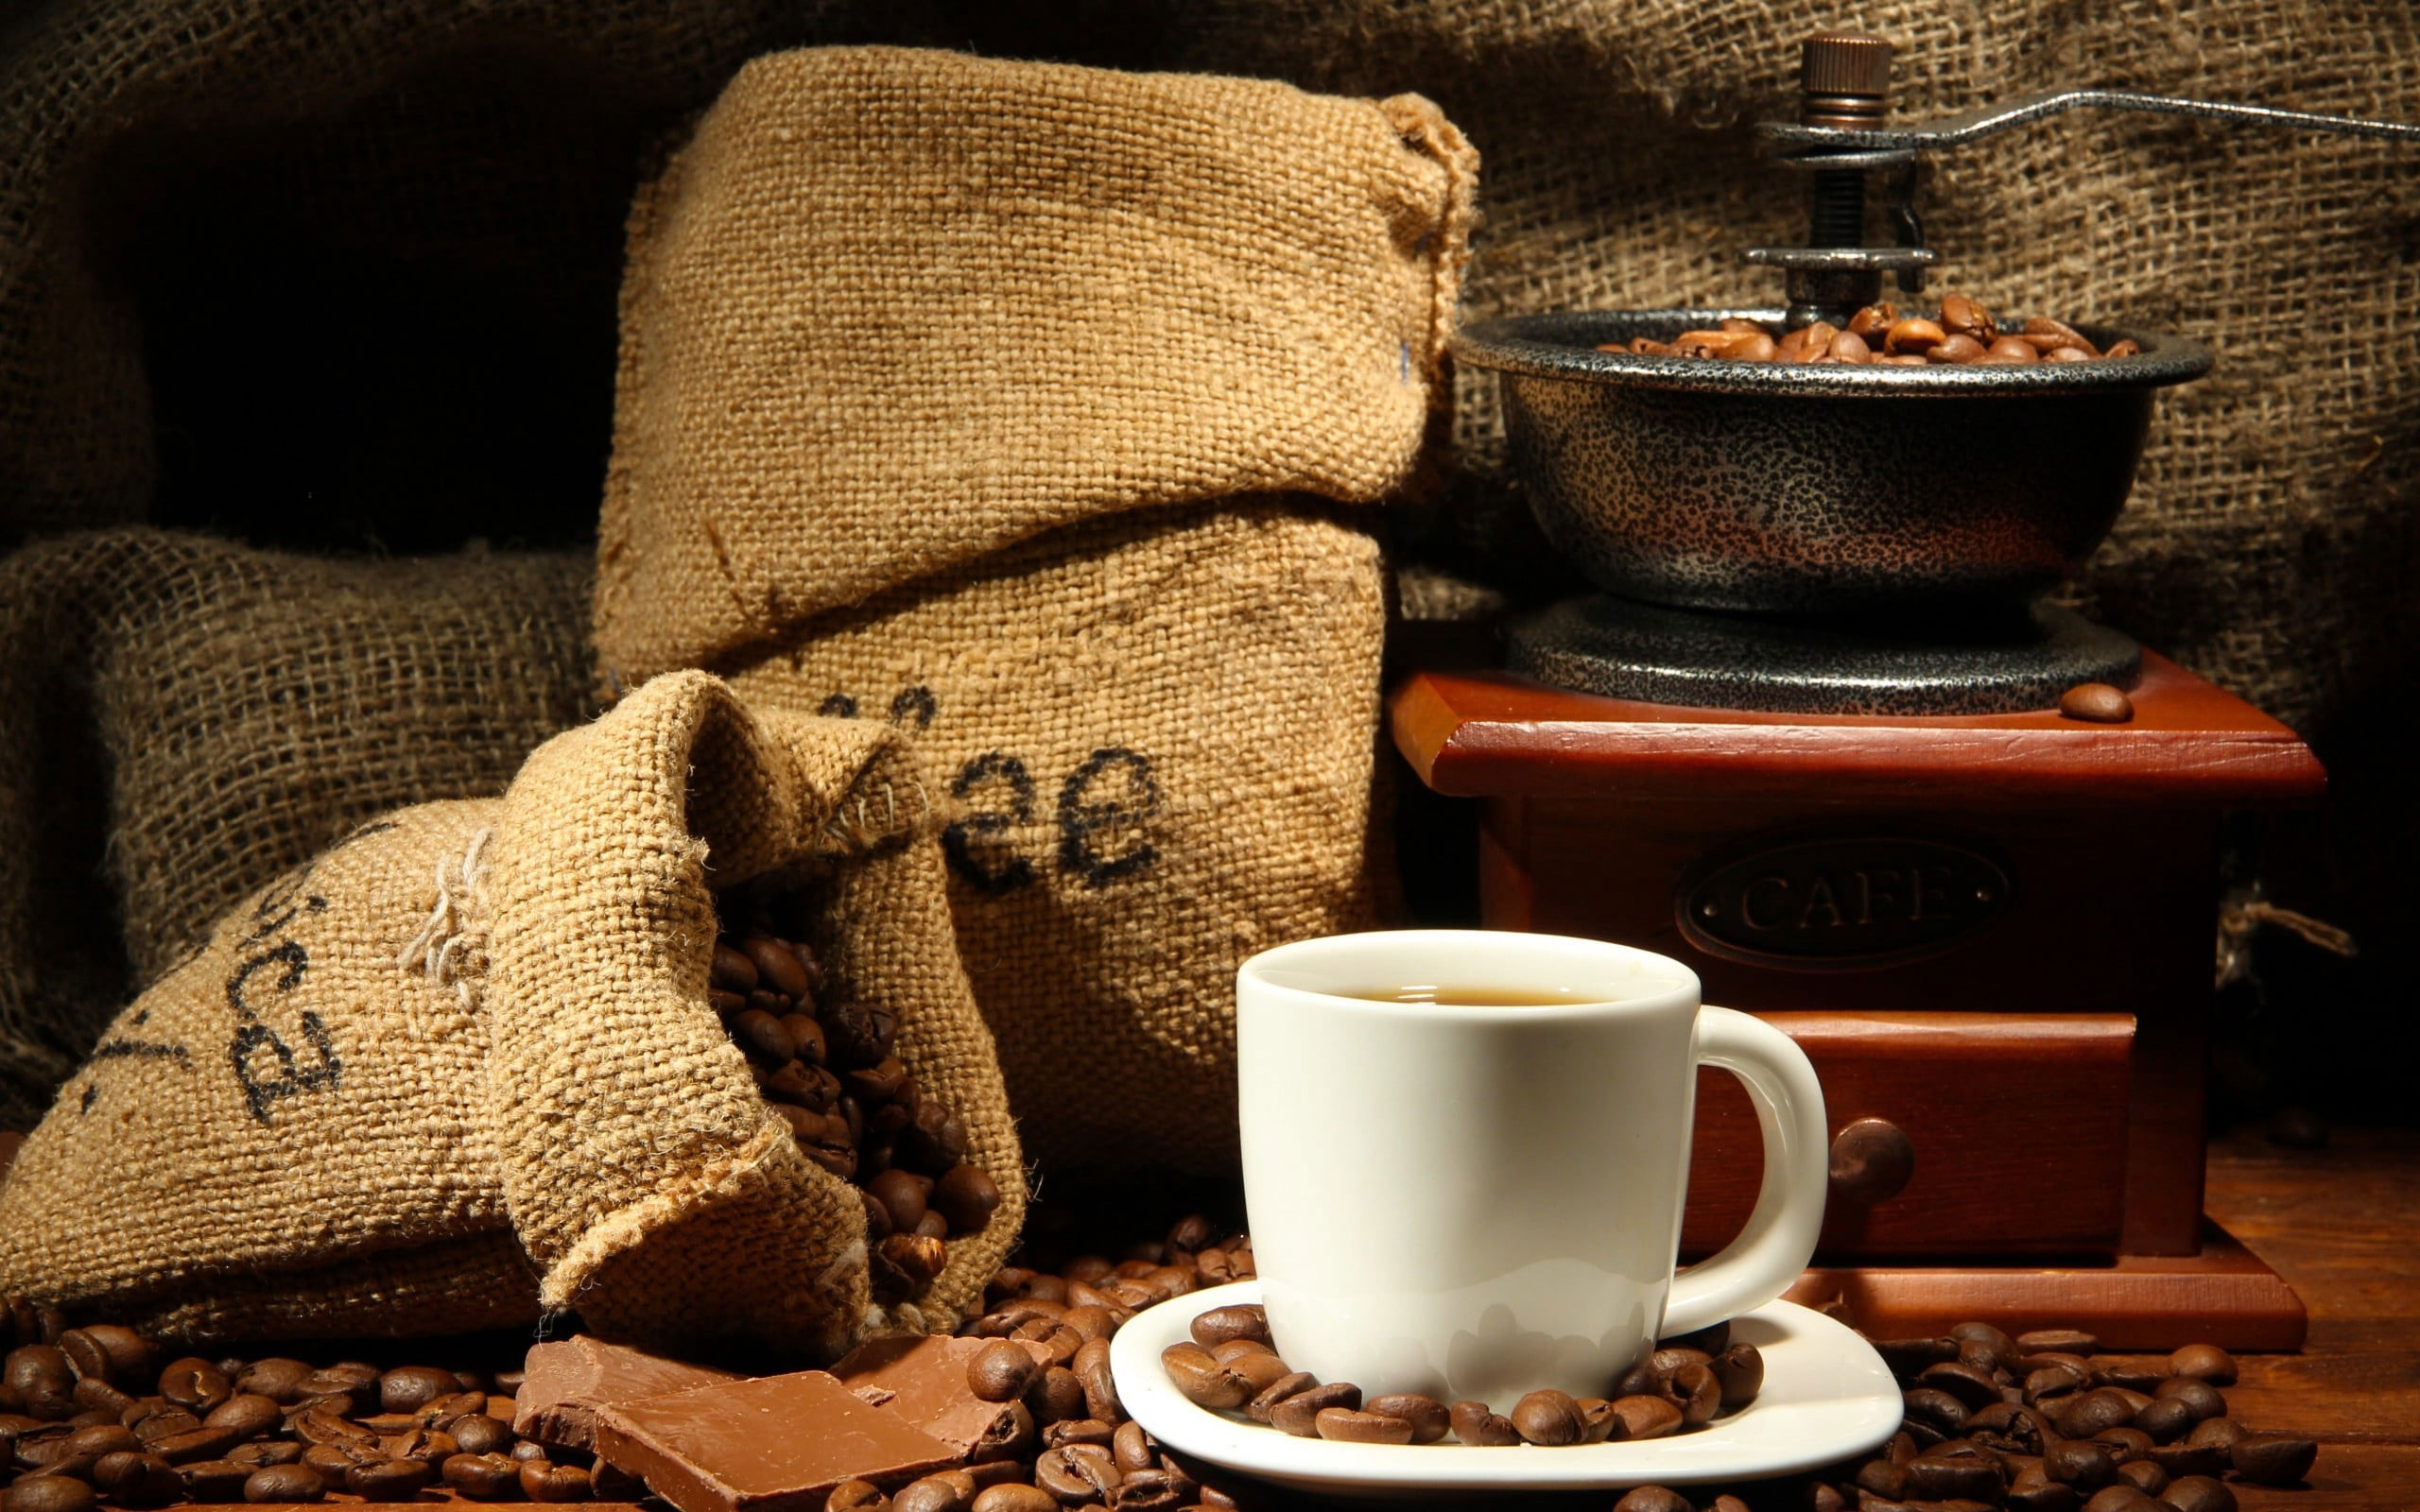 Ceramic cup wallpaper, coffee, coffee beans, drink, refreshment, food and drink